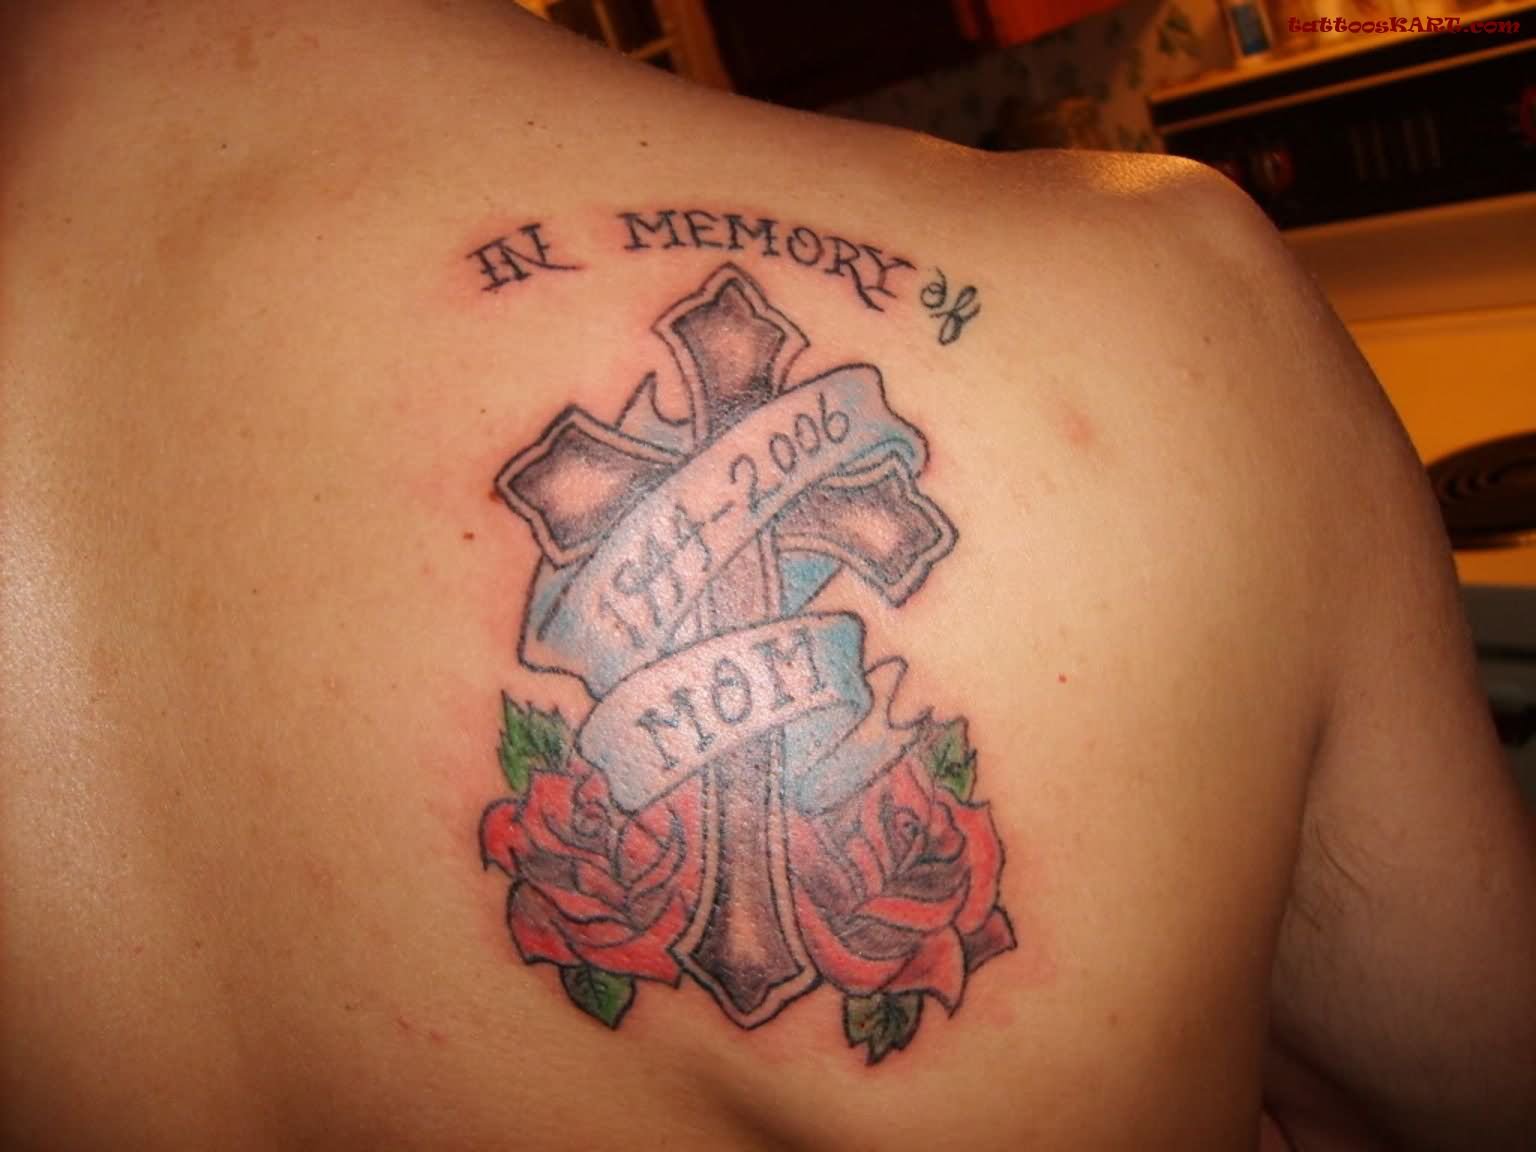 Memorial Cross With Banner And Roses Tattoo On Right Back Shoulder